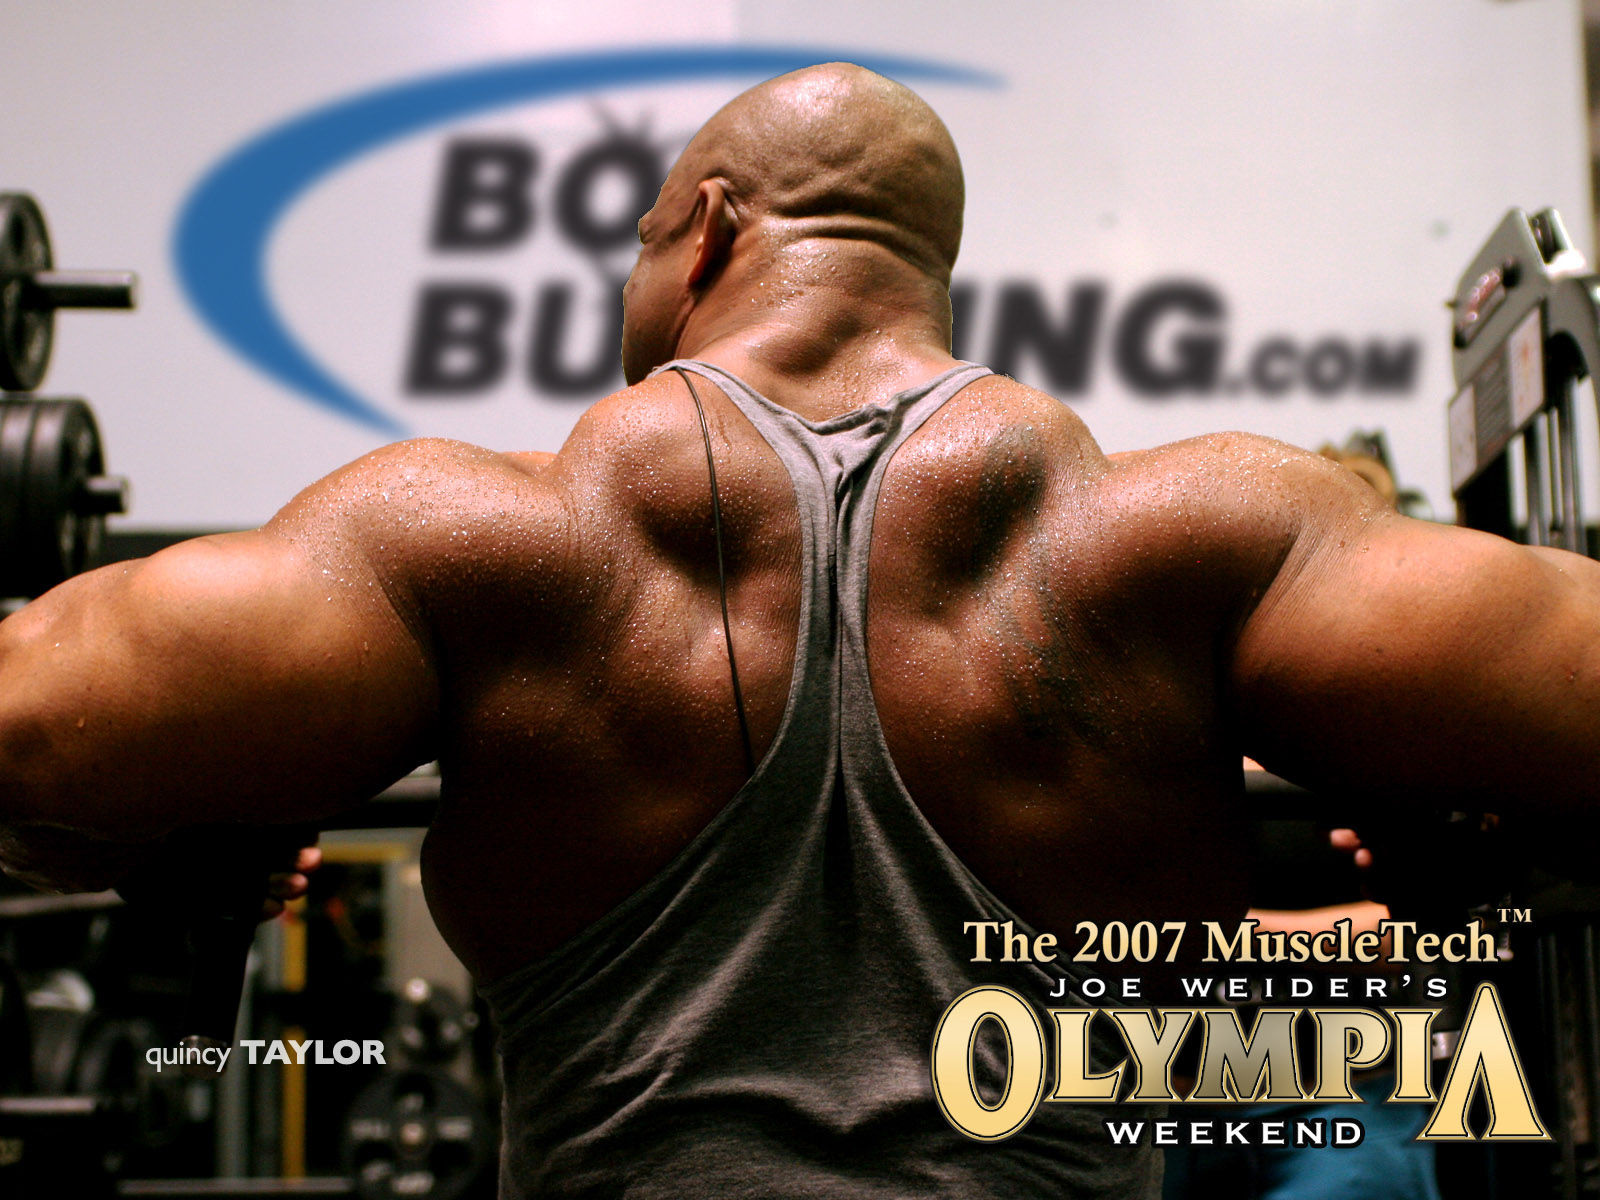 Wallpaper Mr Olympia Quincy Taylor HD